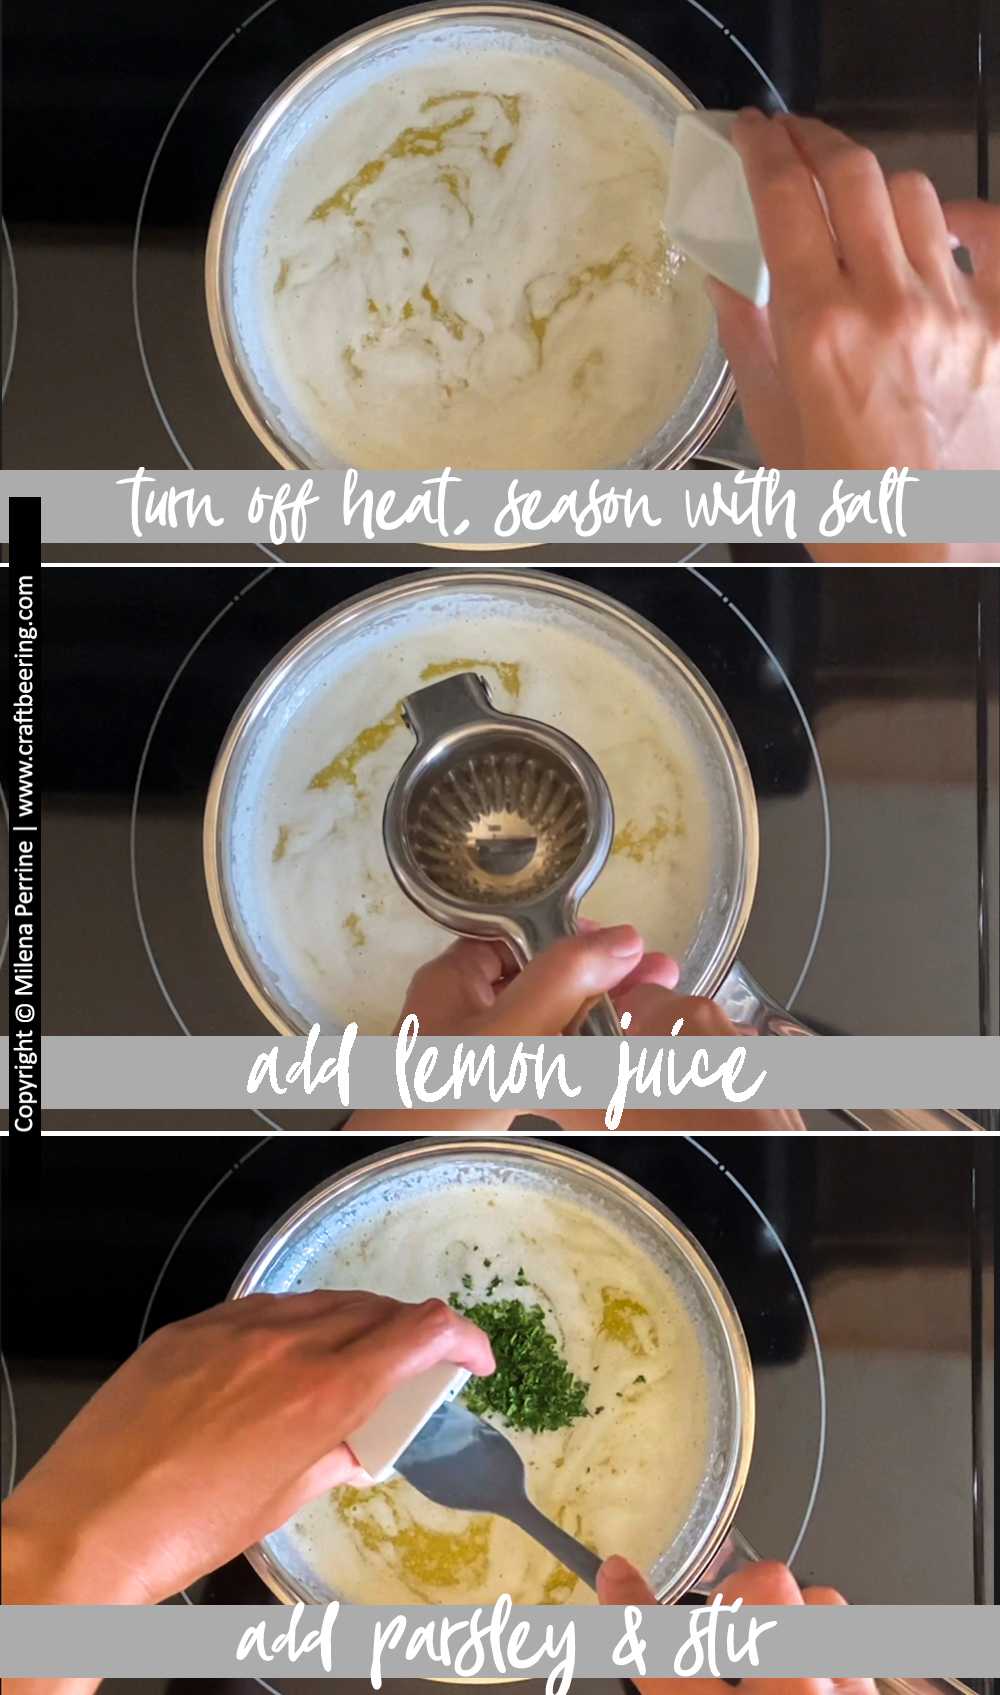 Step by step pictures showing how to make garlic butter sauce (part 2).